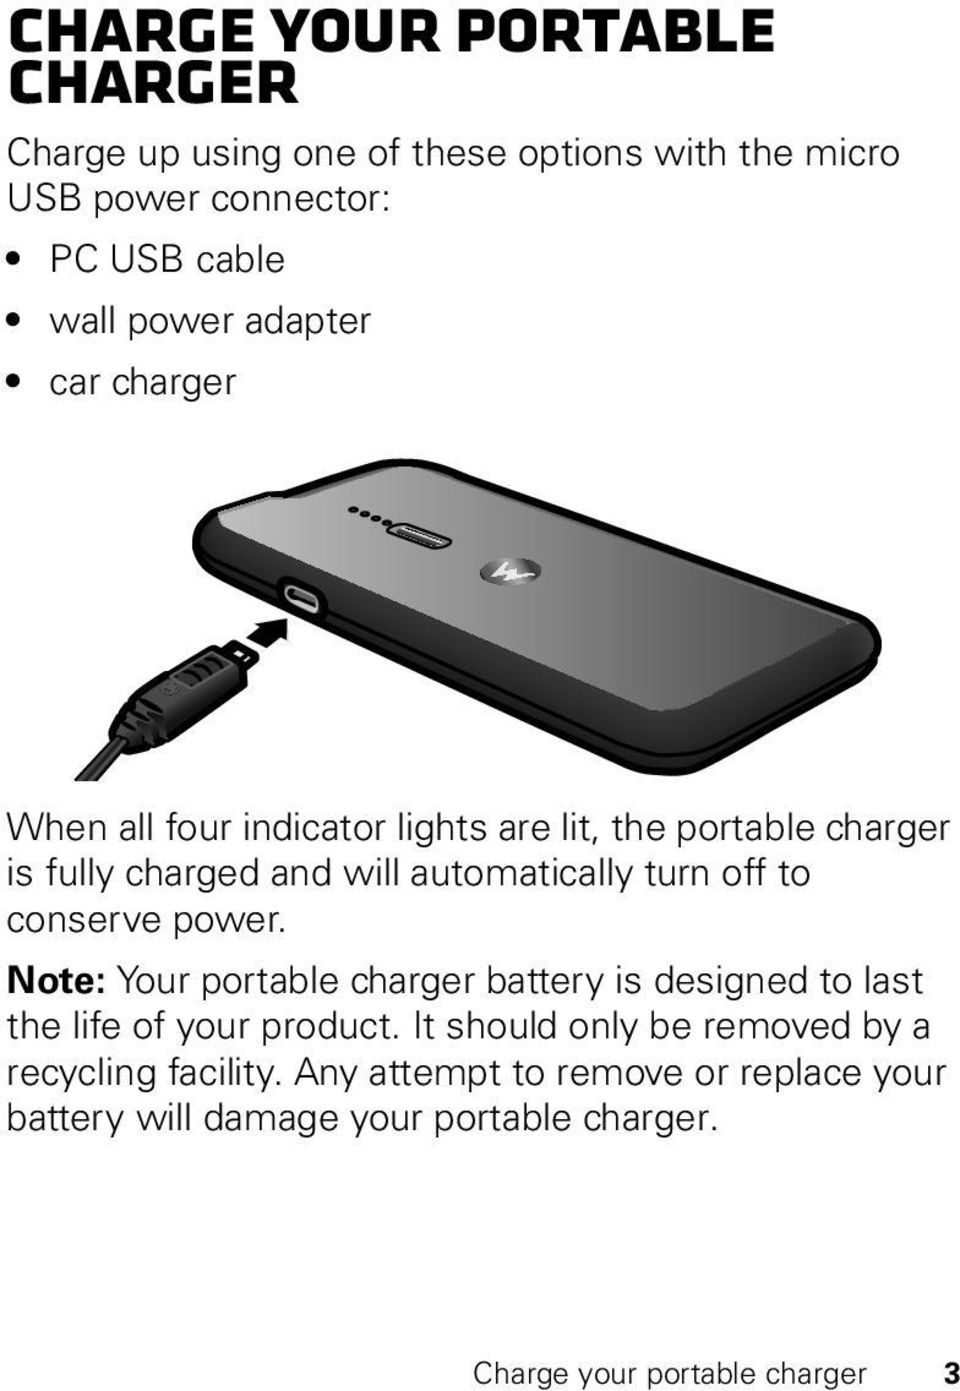 to conserve power. Note: Your portable charger battery is designed to last the life of your product.